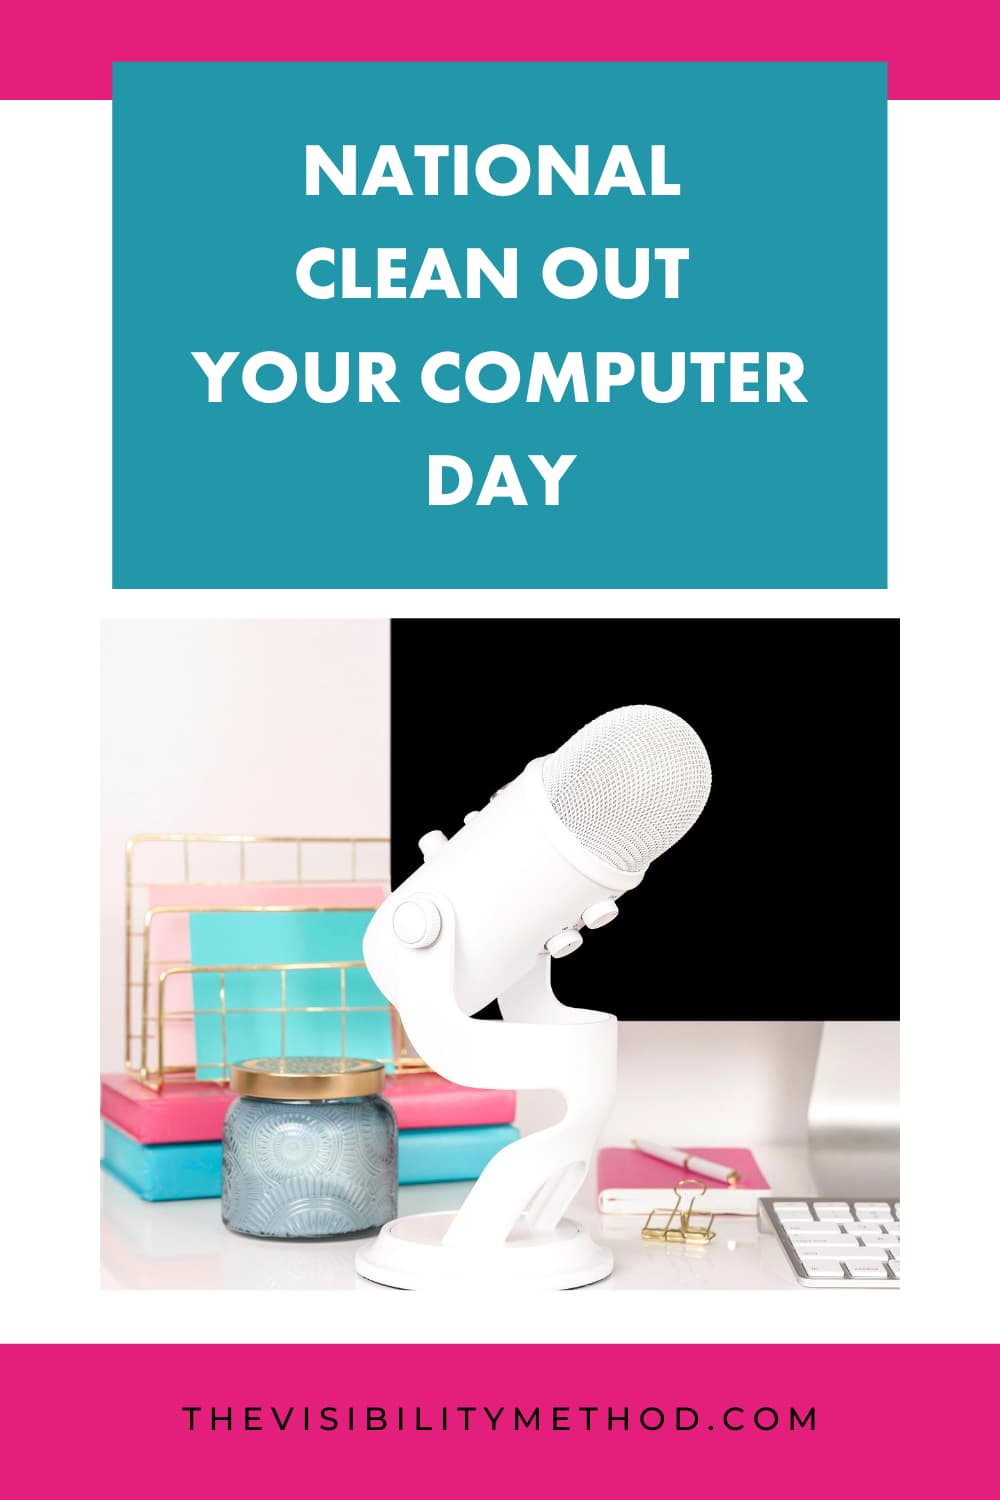 National clean out your computer day